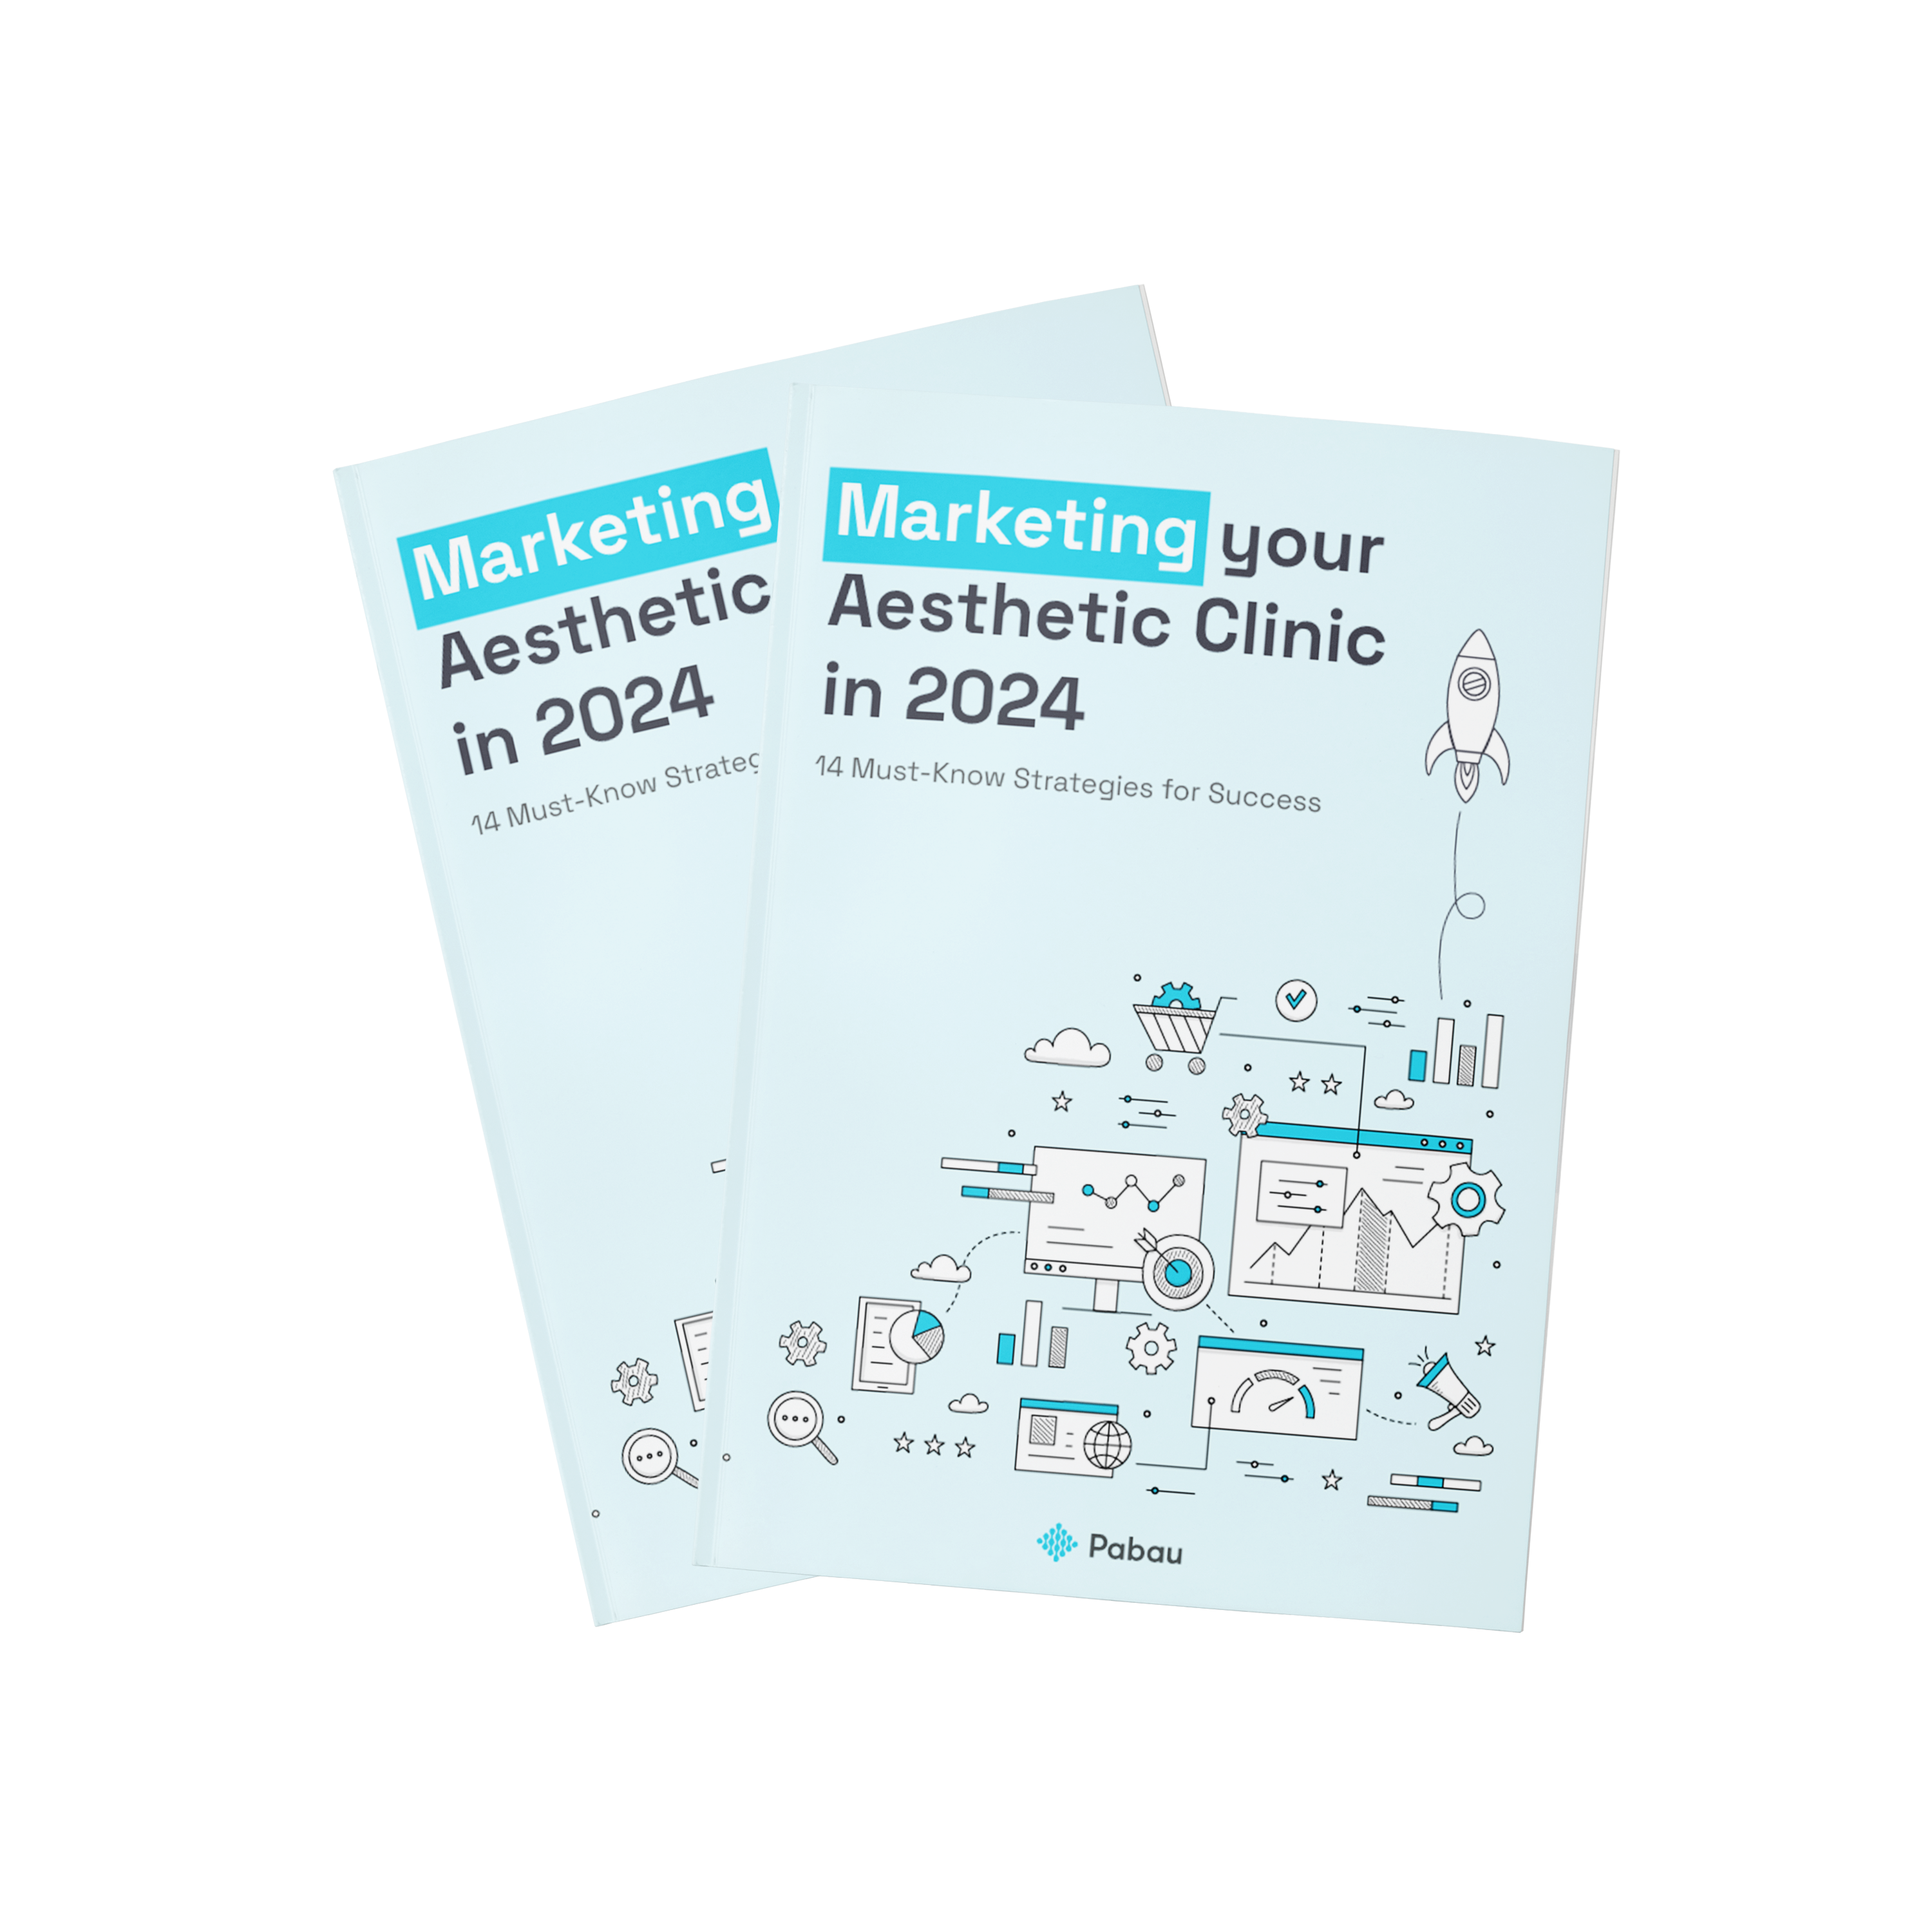 Marketing your aesthetic clinic in 2024